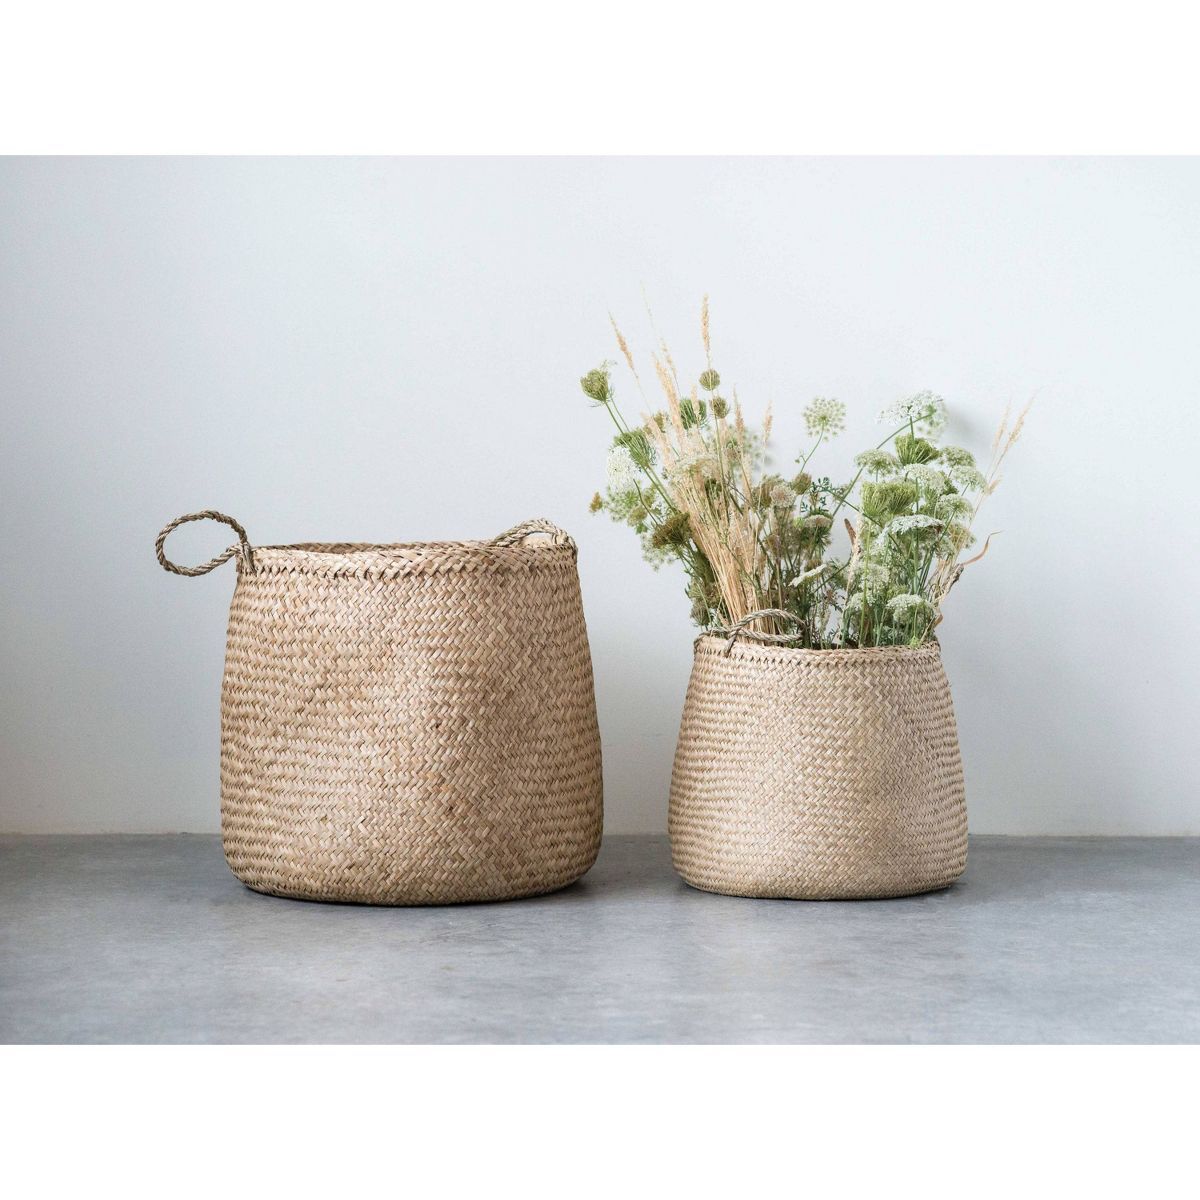 Set of 2 Decorative Woven Seagrass Baskets with Handles Beige - Storied Home | Target